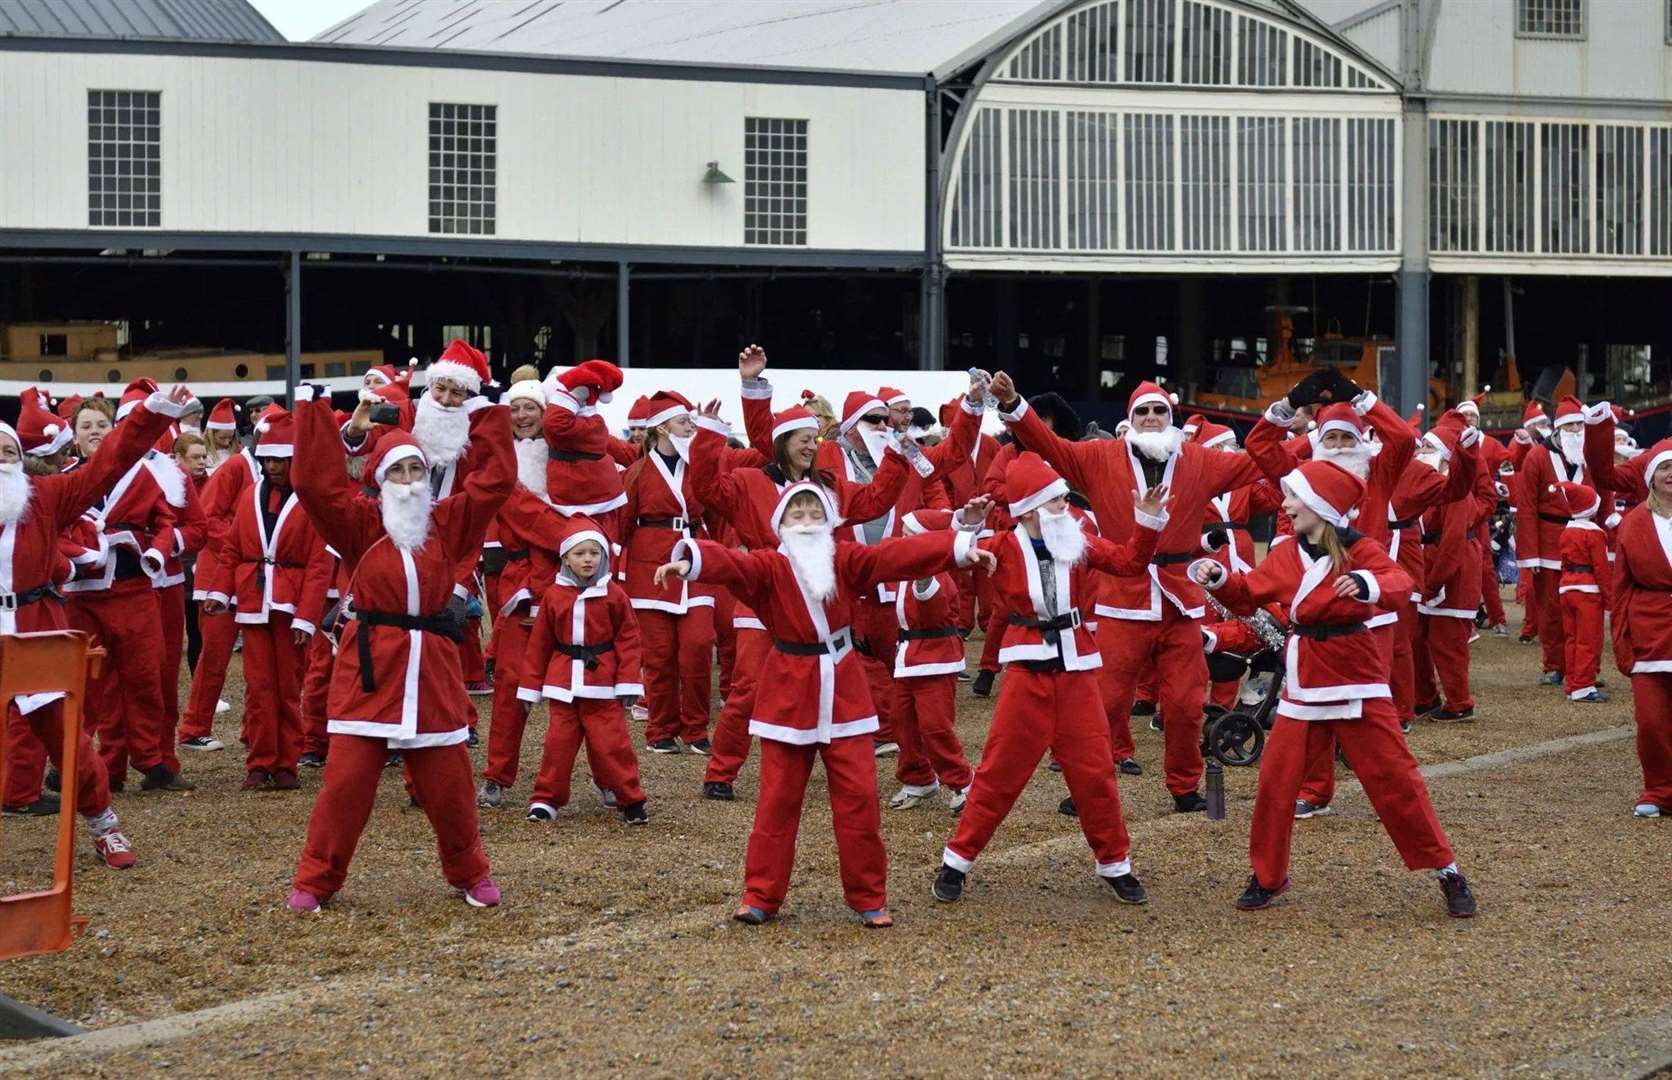 The Fun Run takes Santas through the dockyard, passing ships, buildings and TV sets. Picture: Historic Dockyard Chatham